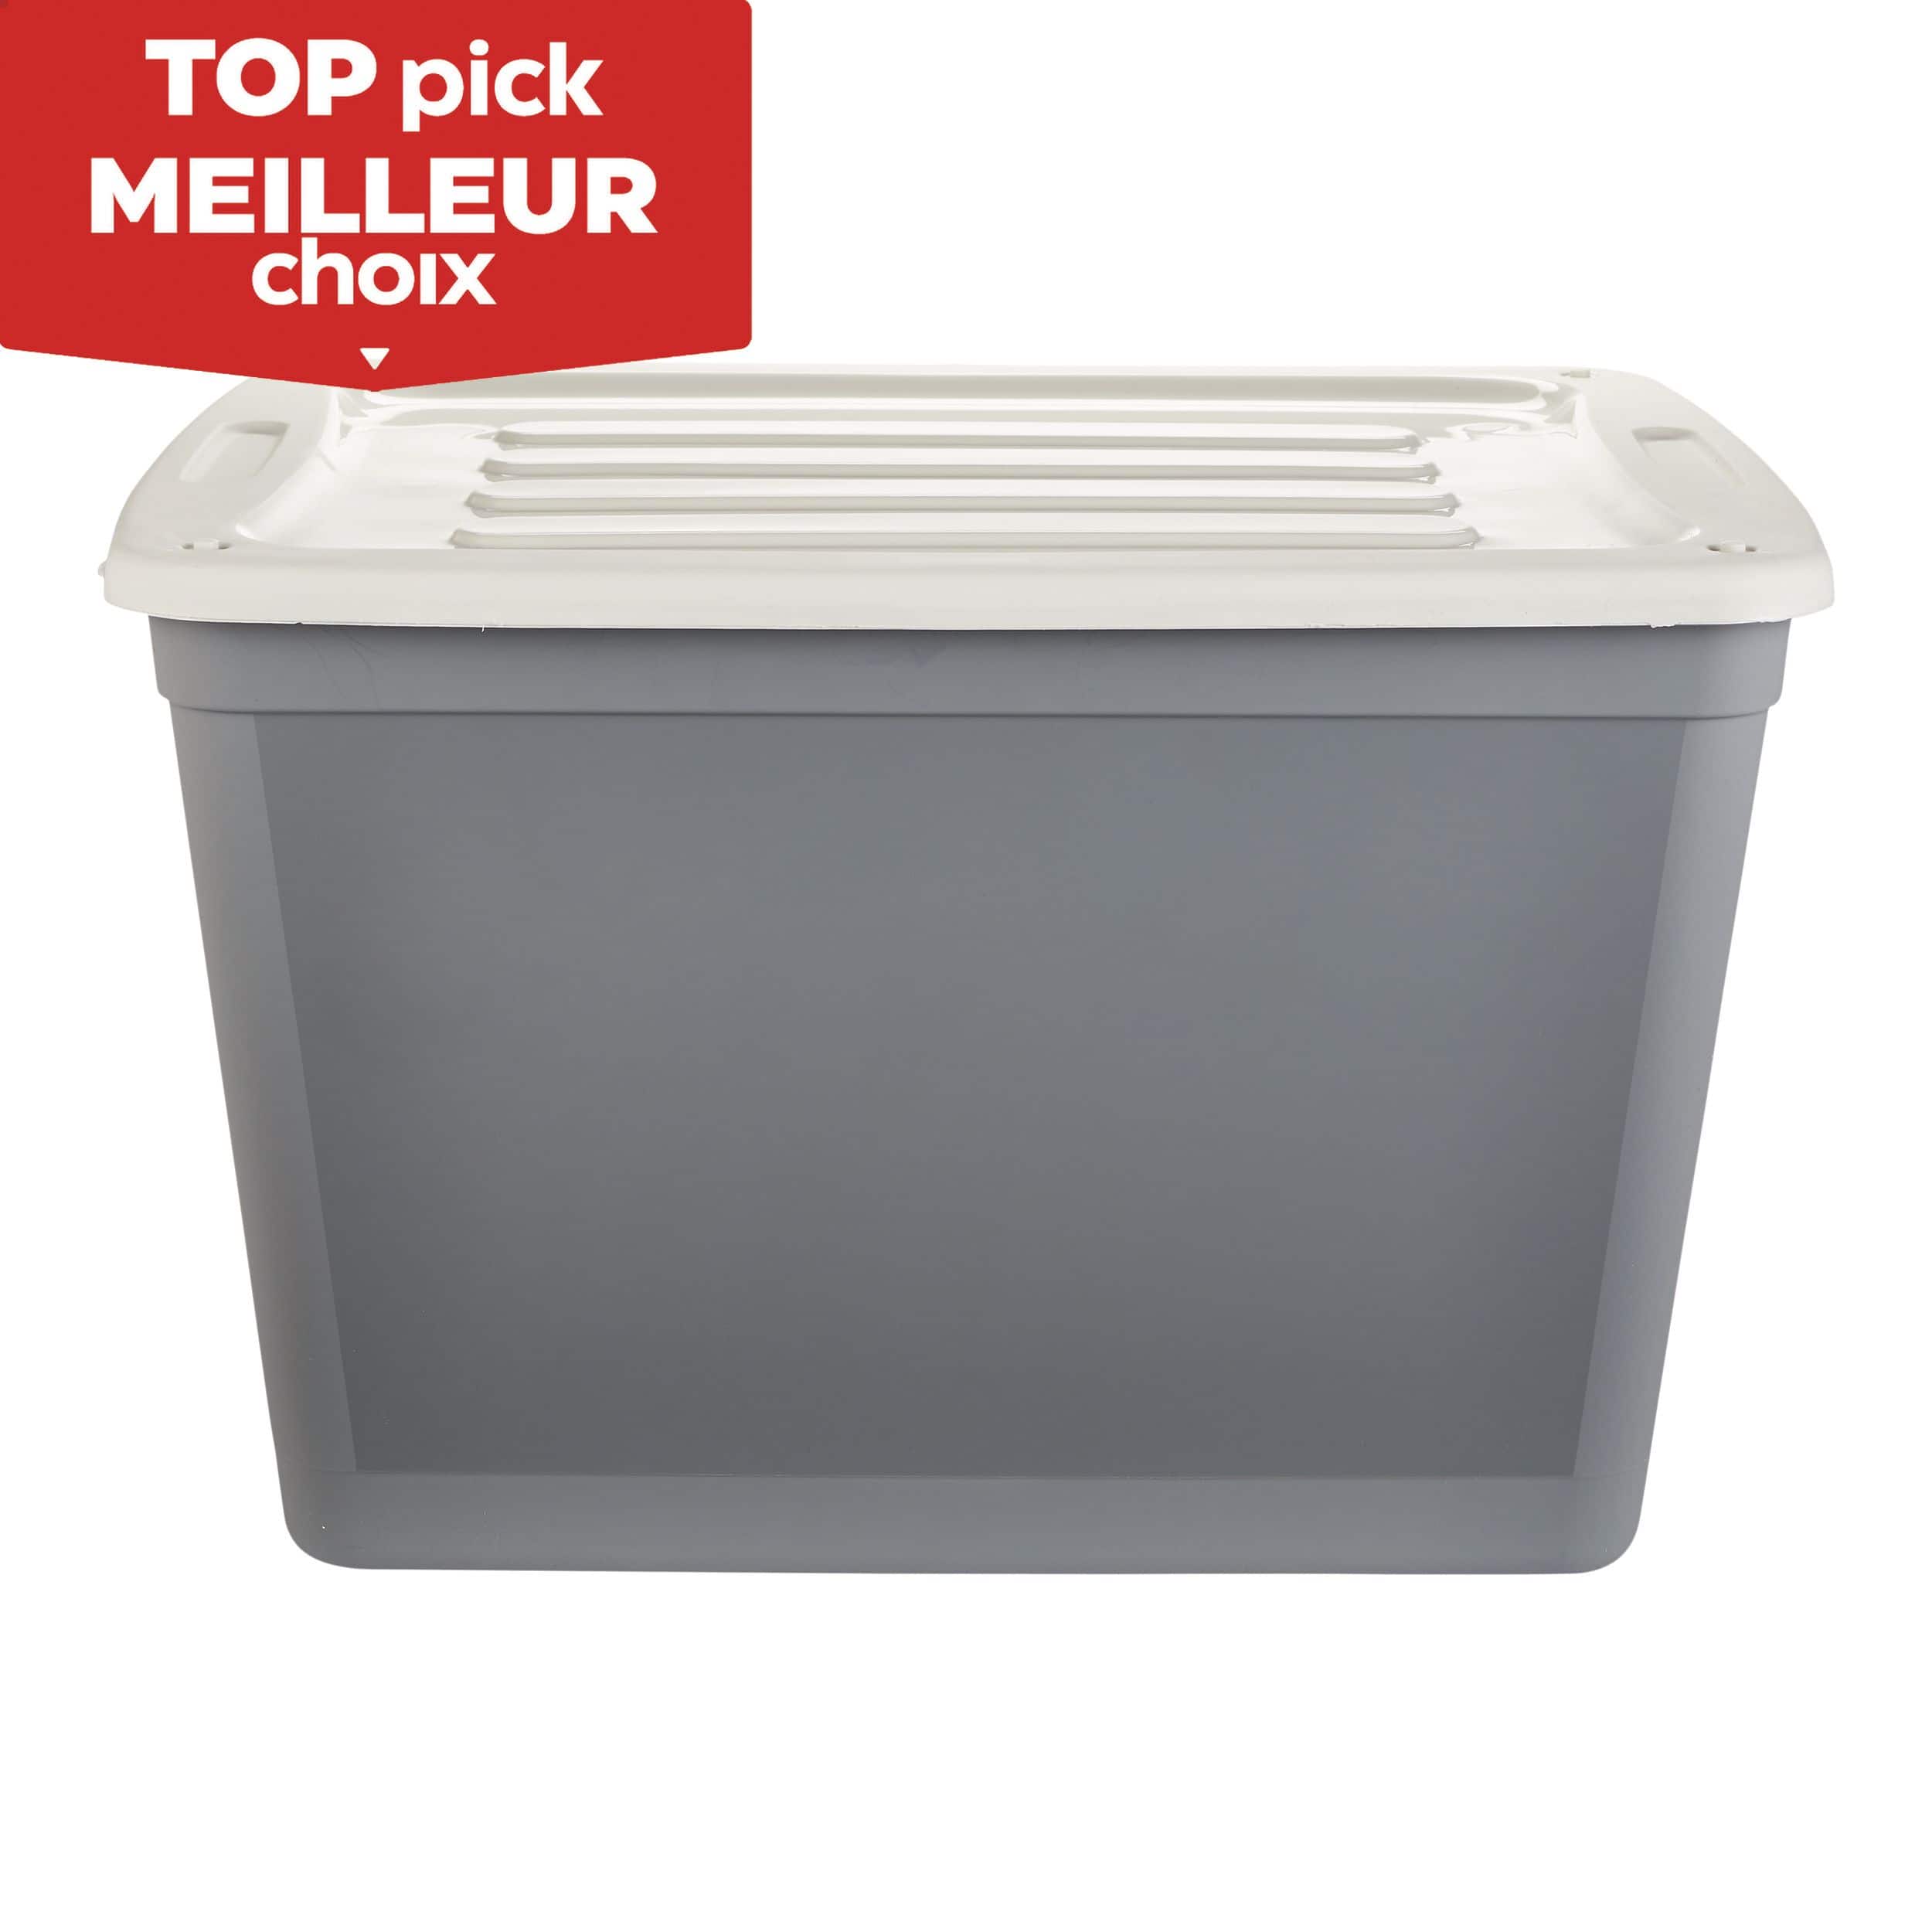 https://media-www.canadiantire.ca/product/living/home-organization/storage-solutions/1422030/80l-with-wheels-tote-solid-77e0079d-5859-4bfa-b843-fcb8afa46e01-jpgrendition.jpg